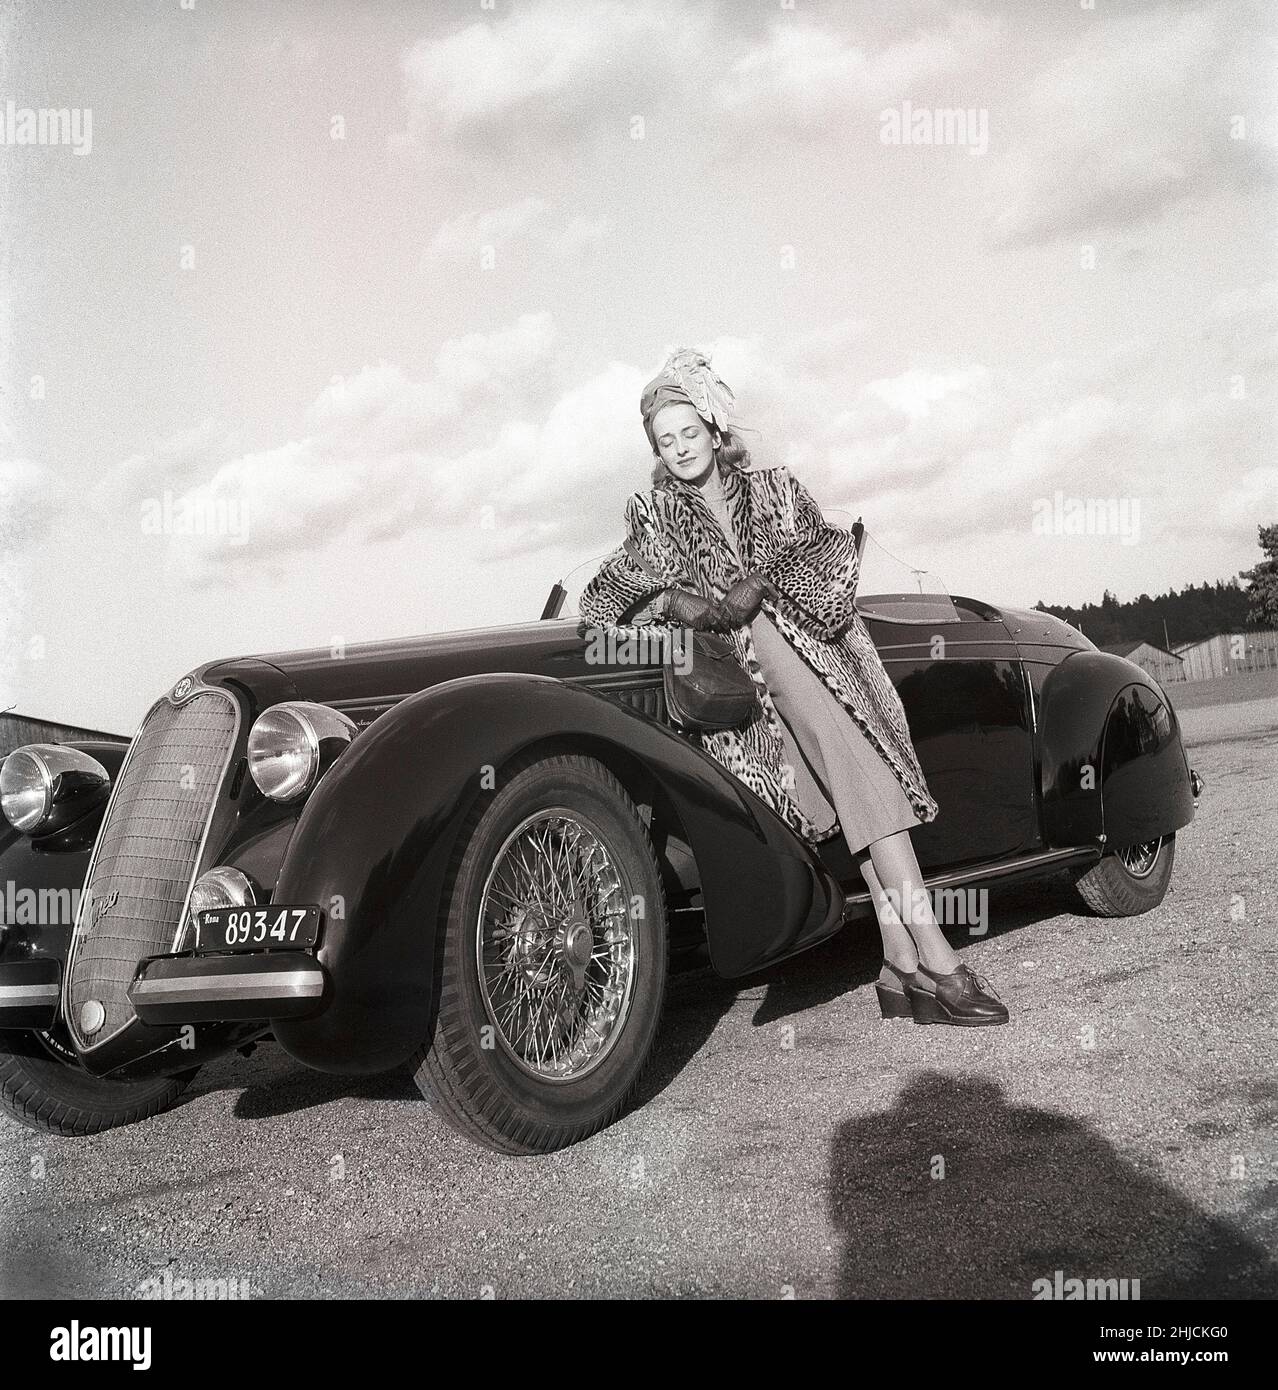 Women's fashion in the 1940s. A young woman in a typical 1940s outfit. A matching skirt and jacket with a leopard patterened coat . The car is a italian sports car from the car manufacturer Alfa Romeo.   Sweden 1946. Kristoffersson Ref X1-3 Stock Photo